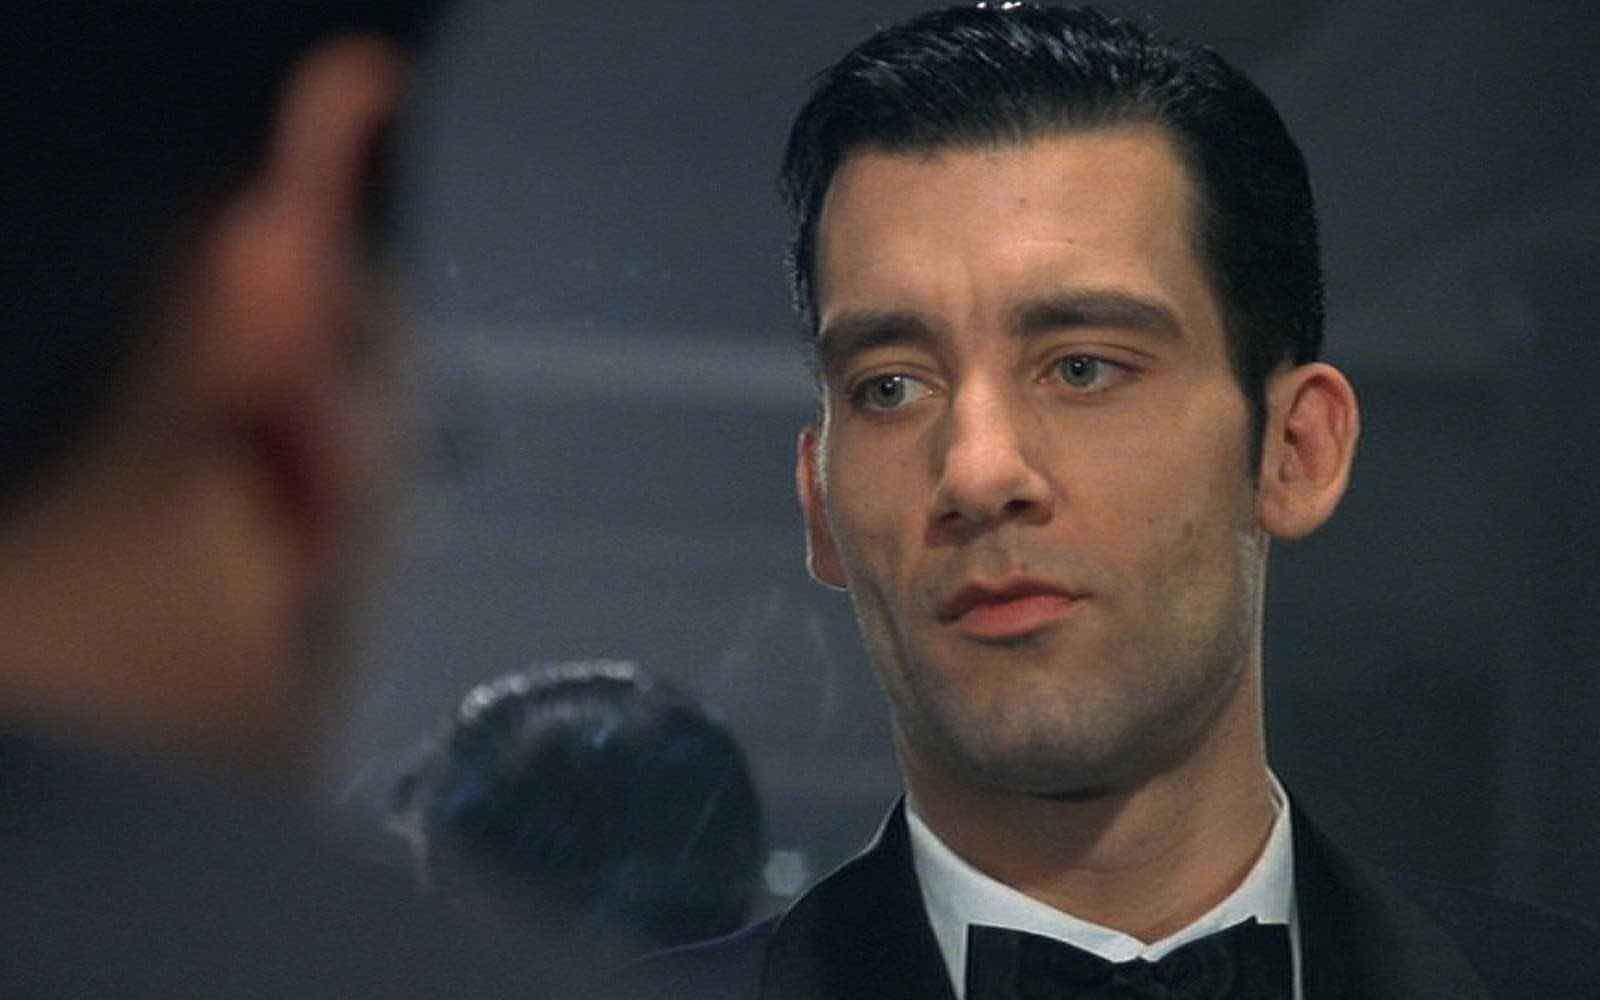 Jackpots and Drama: 5 Best Casino Movies of All Time – Film Daily